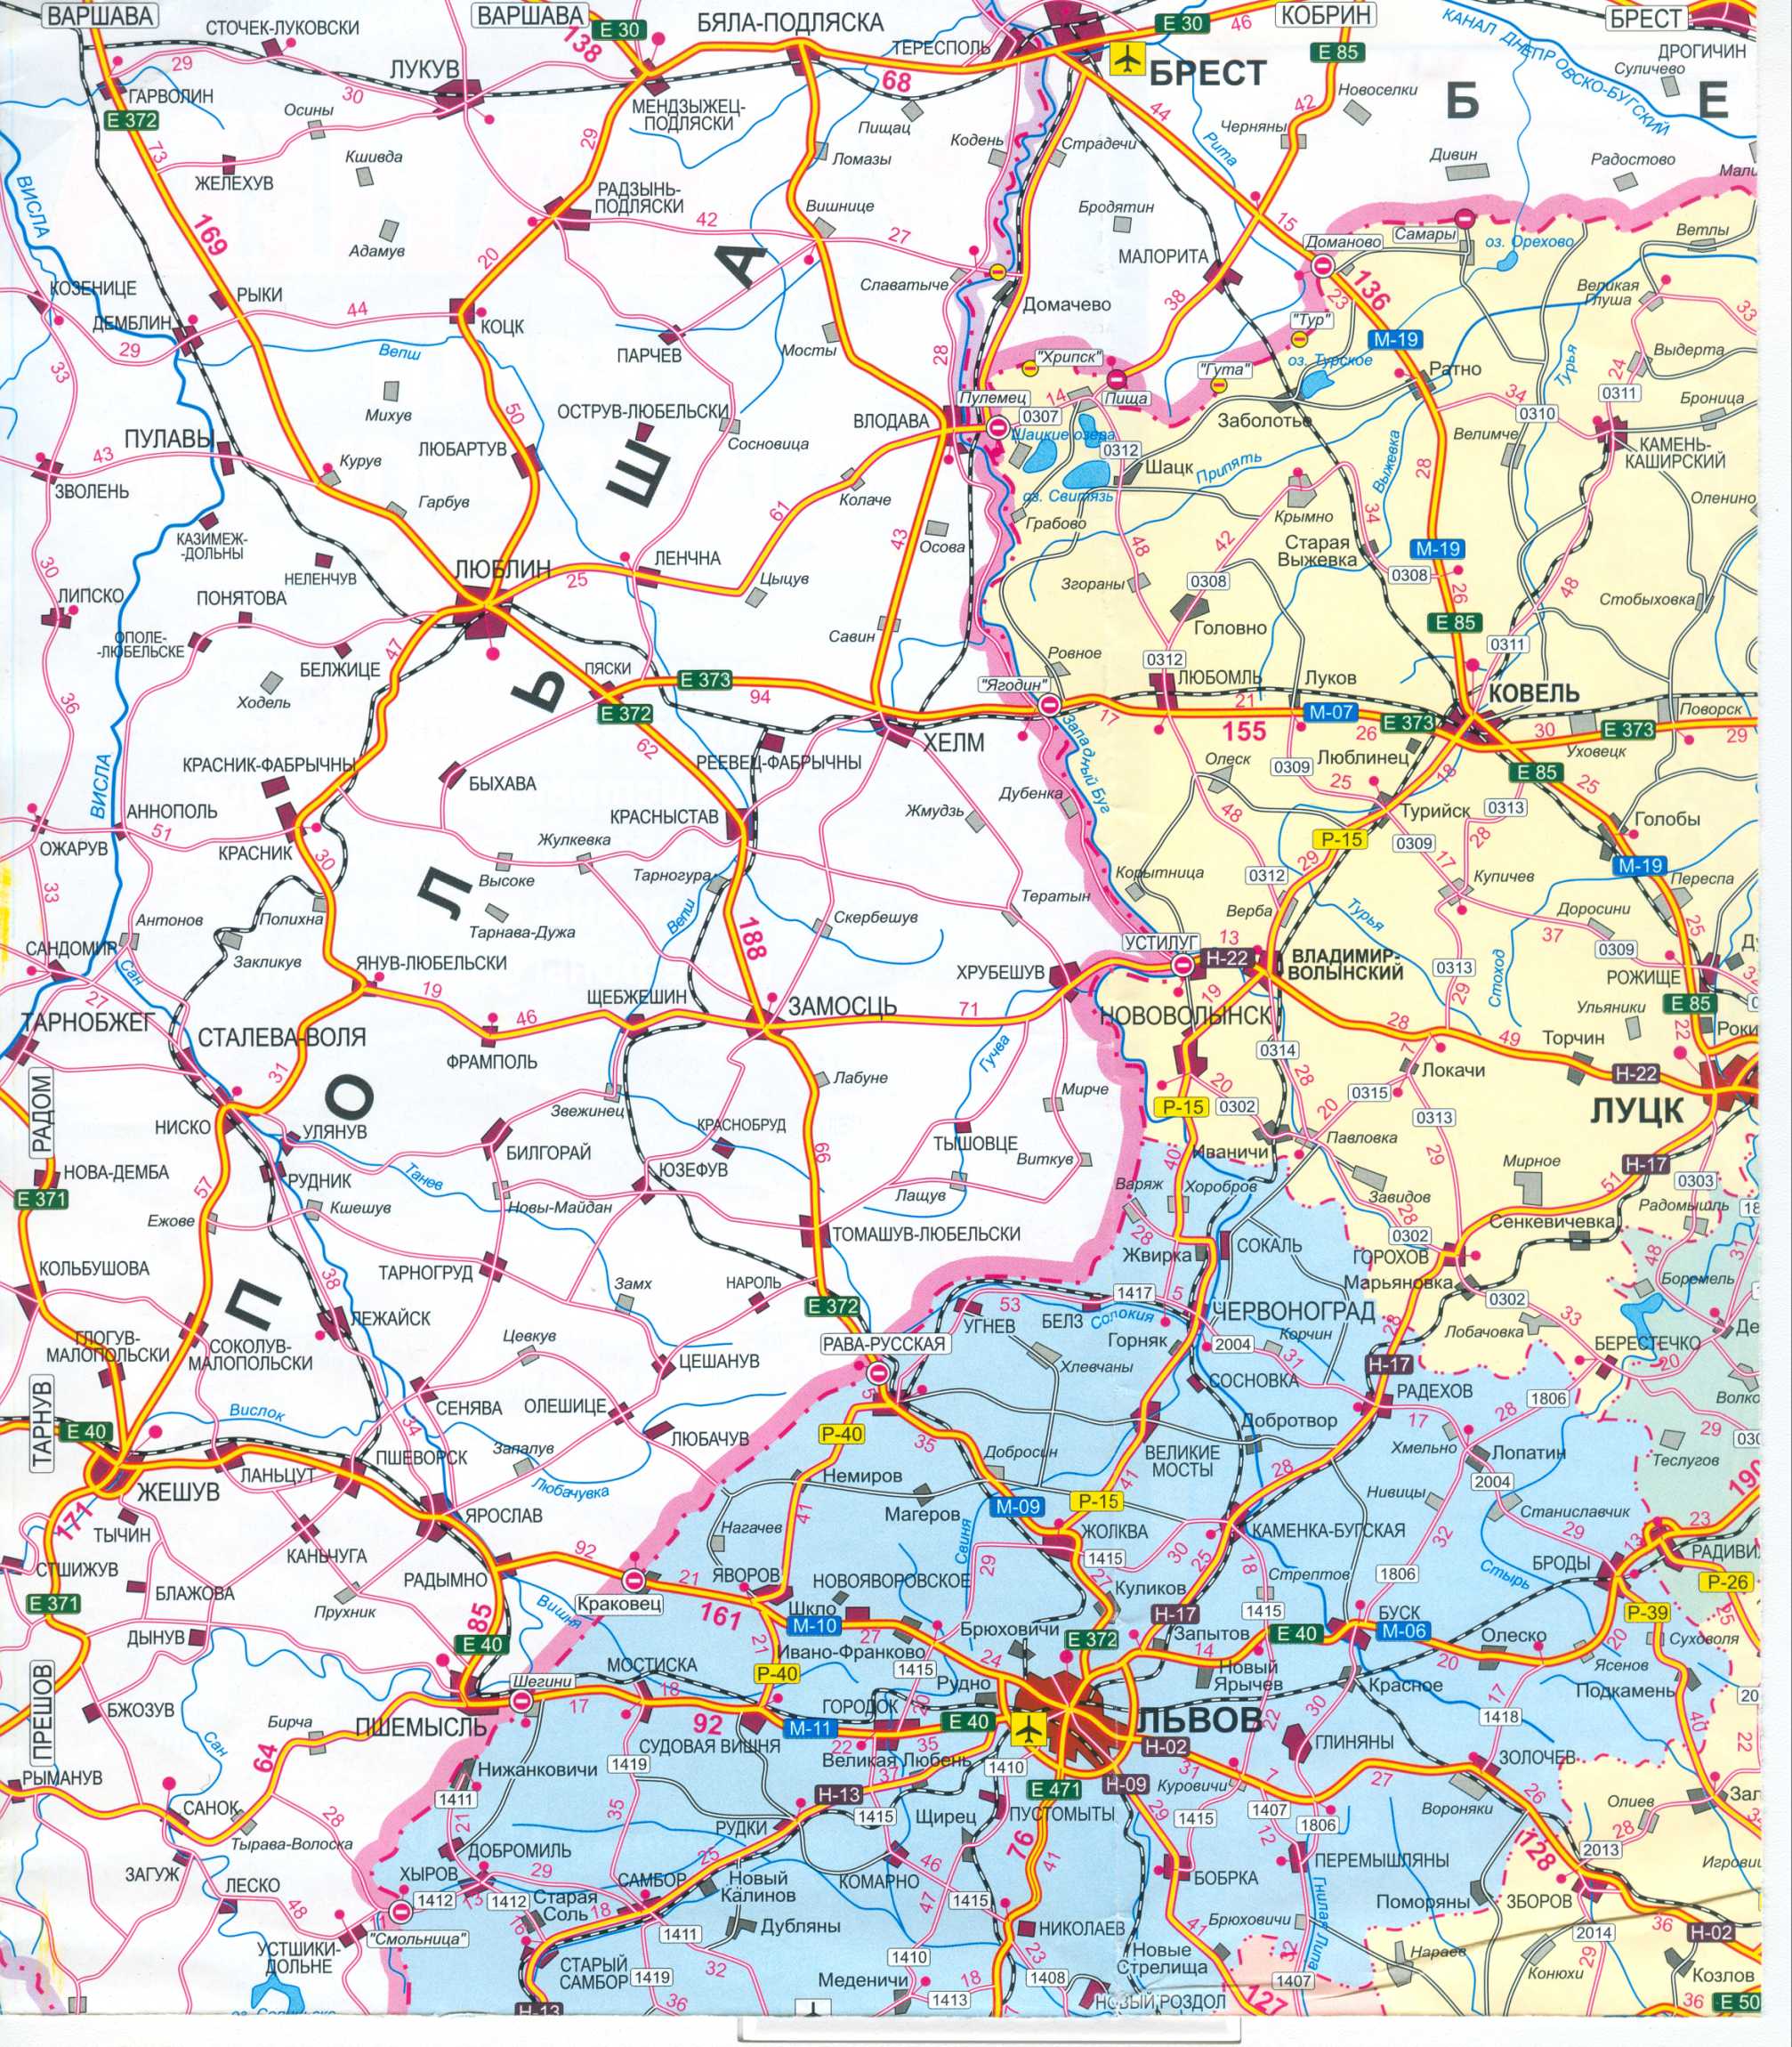 The map of Ukraine is free of charge. Map of roads of Ukraine free download. A large map of Ukraine's roads is free of charge, A0